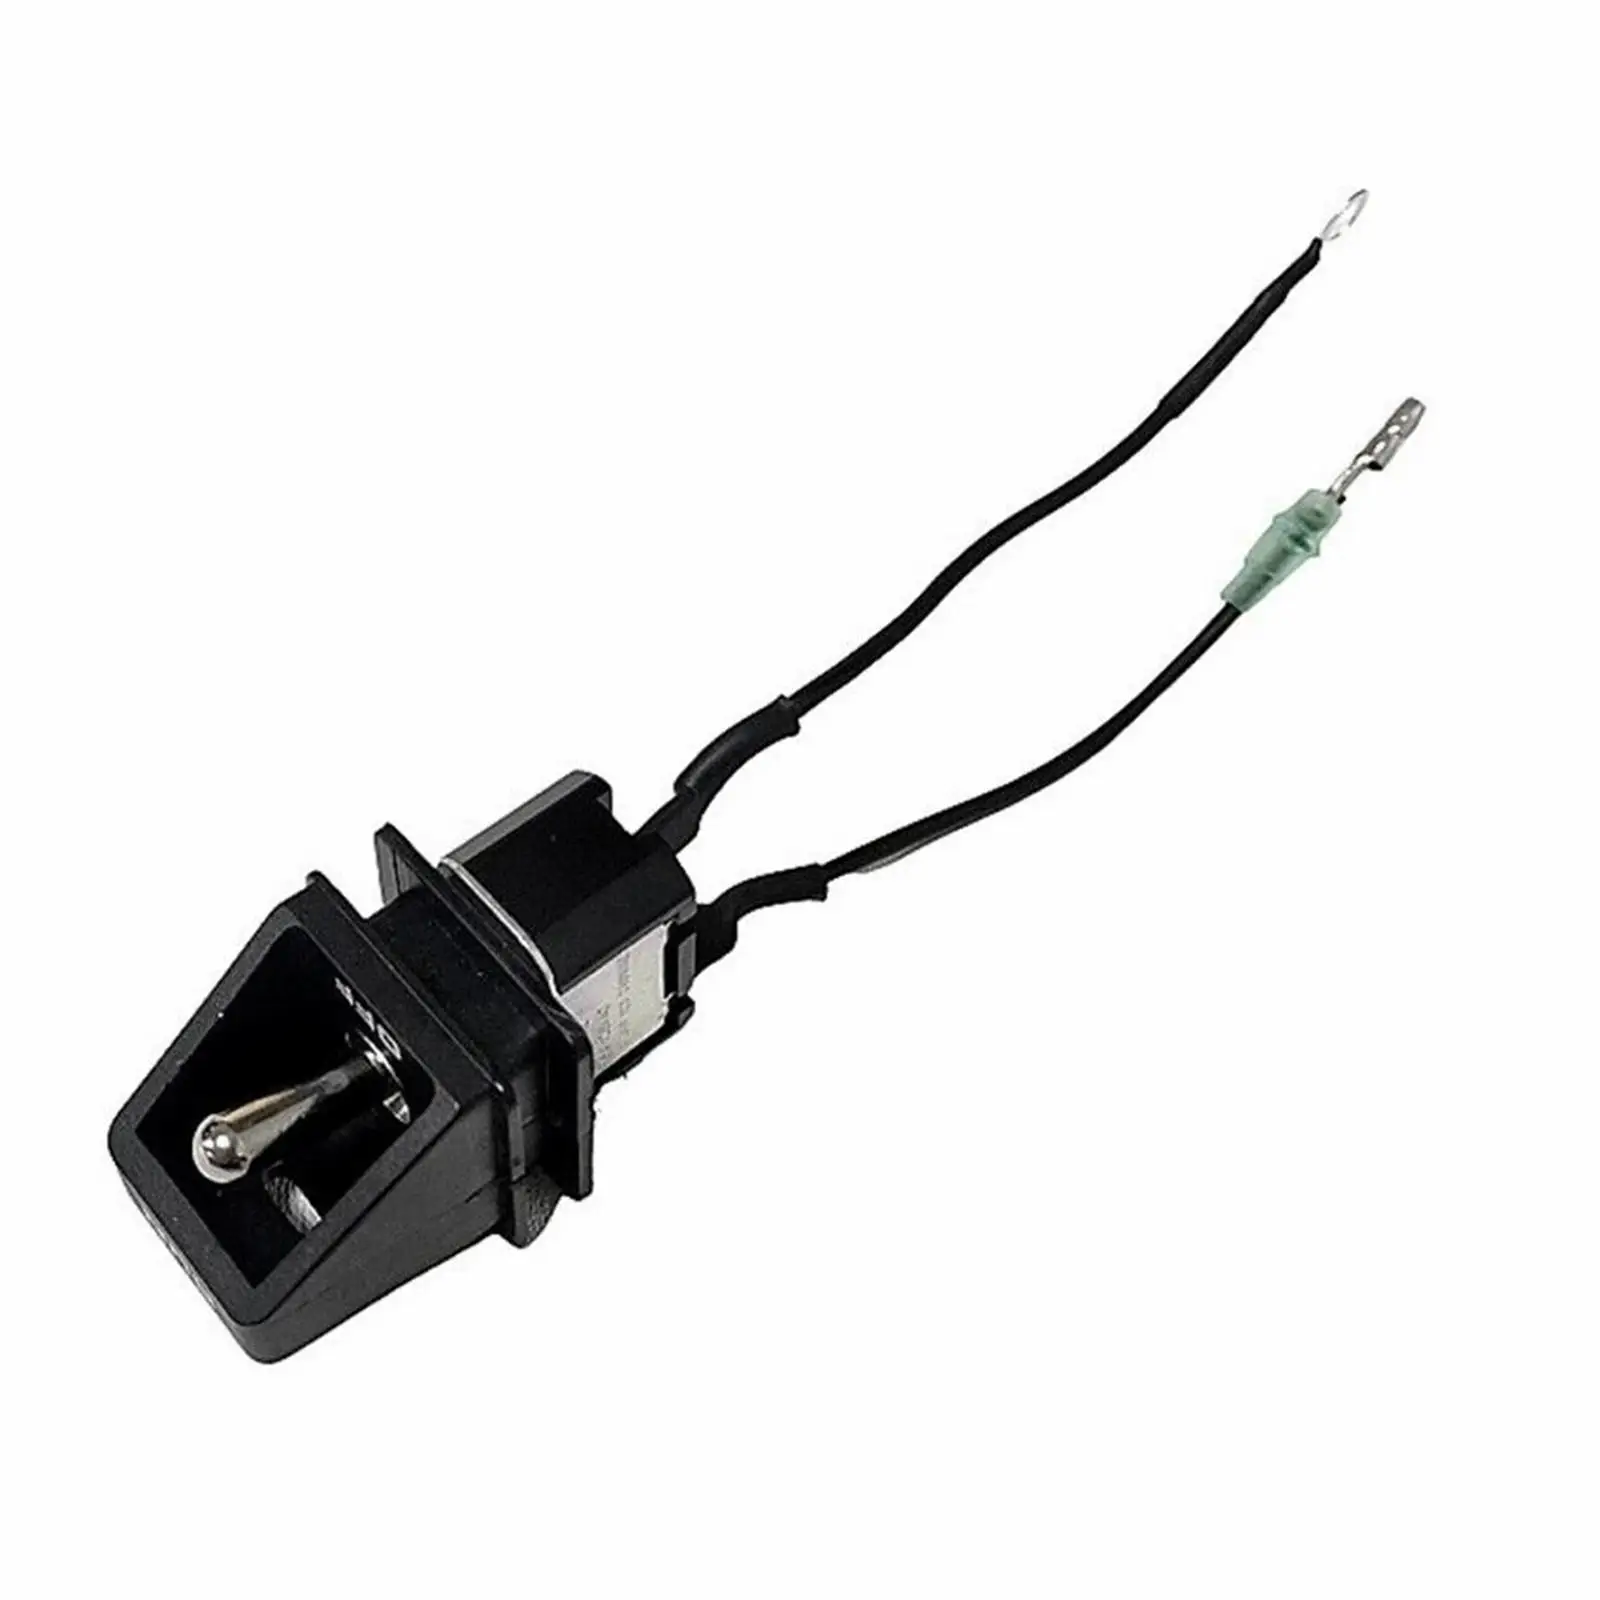 Stop Switch 87-91941A6 Good Performance for Outboard Motor Remote Control Box Assembly Part